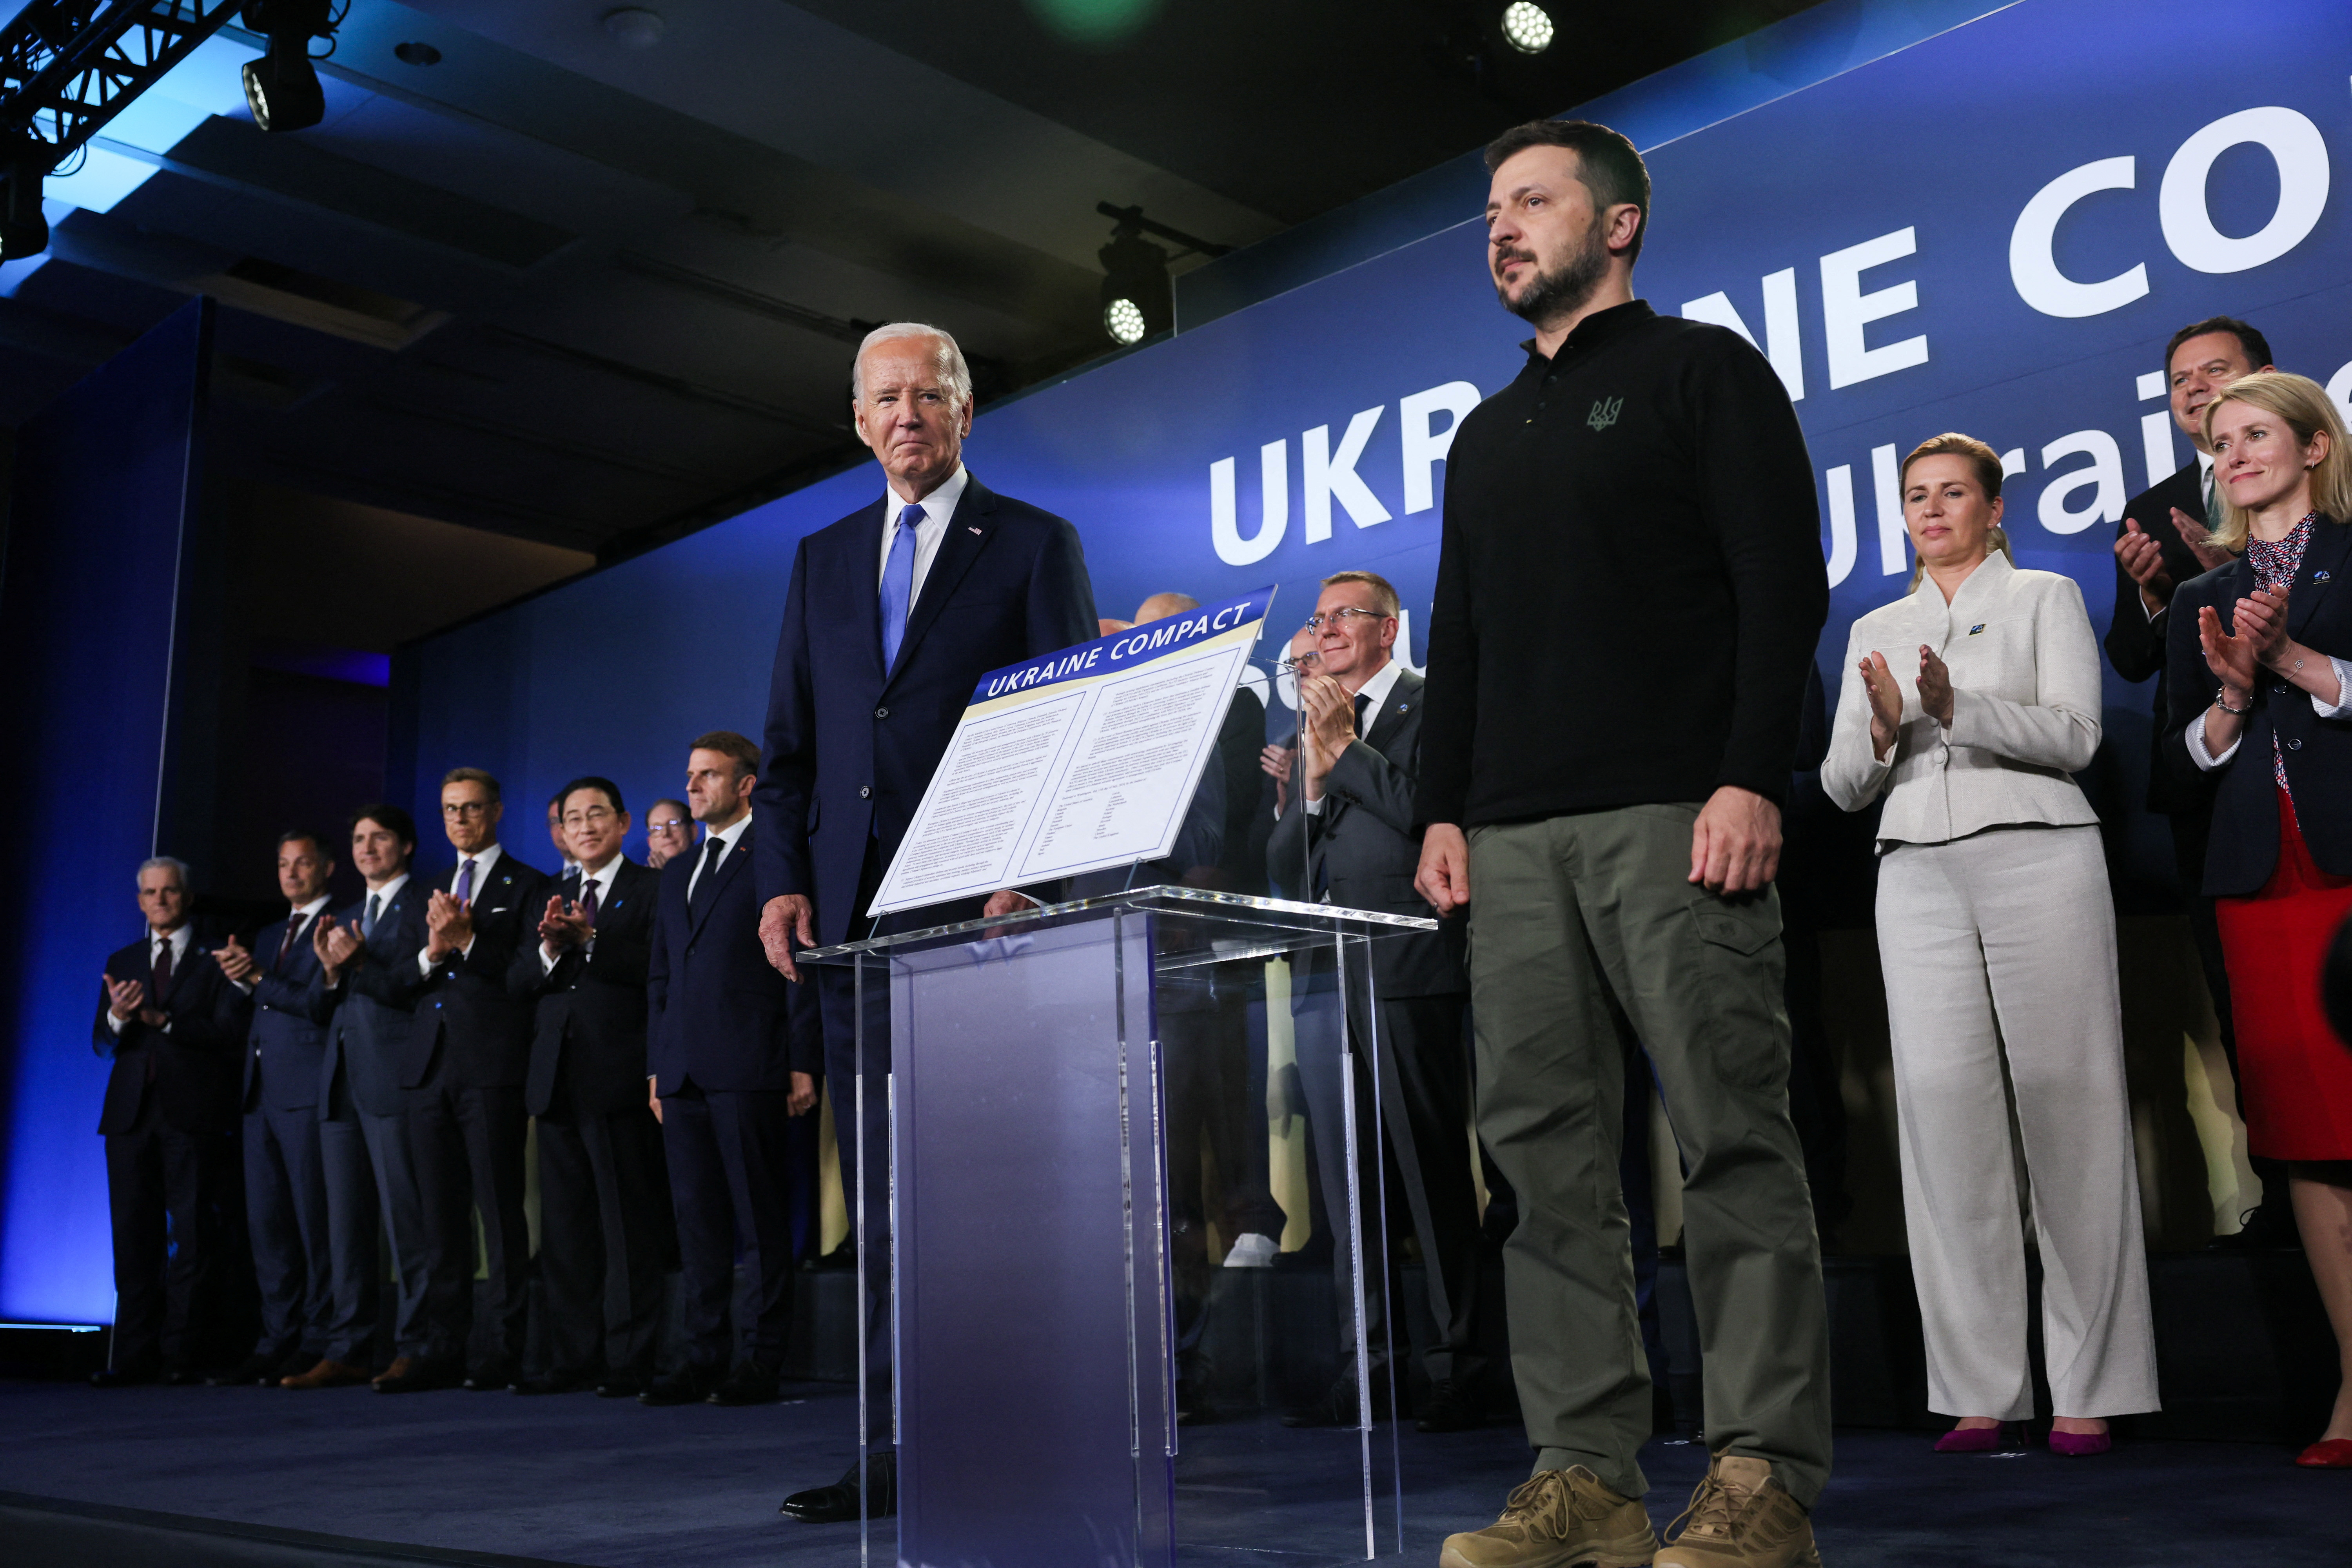 Biden stands on stage with Zelenskyy at a NATO Ukraine council stage.